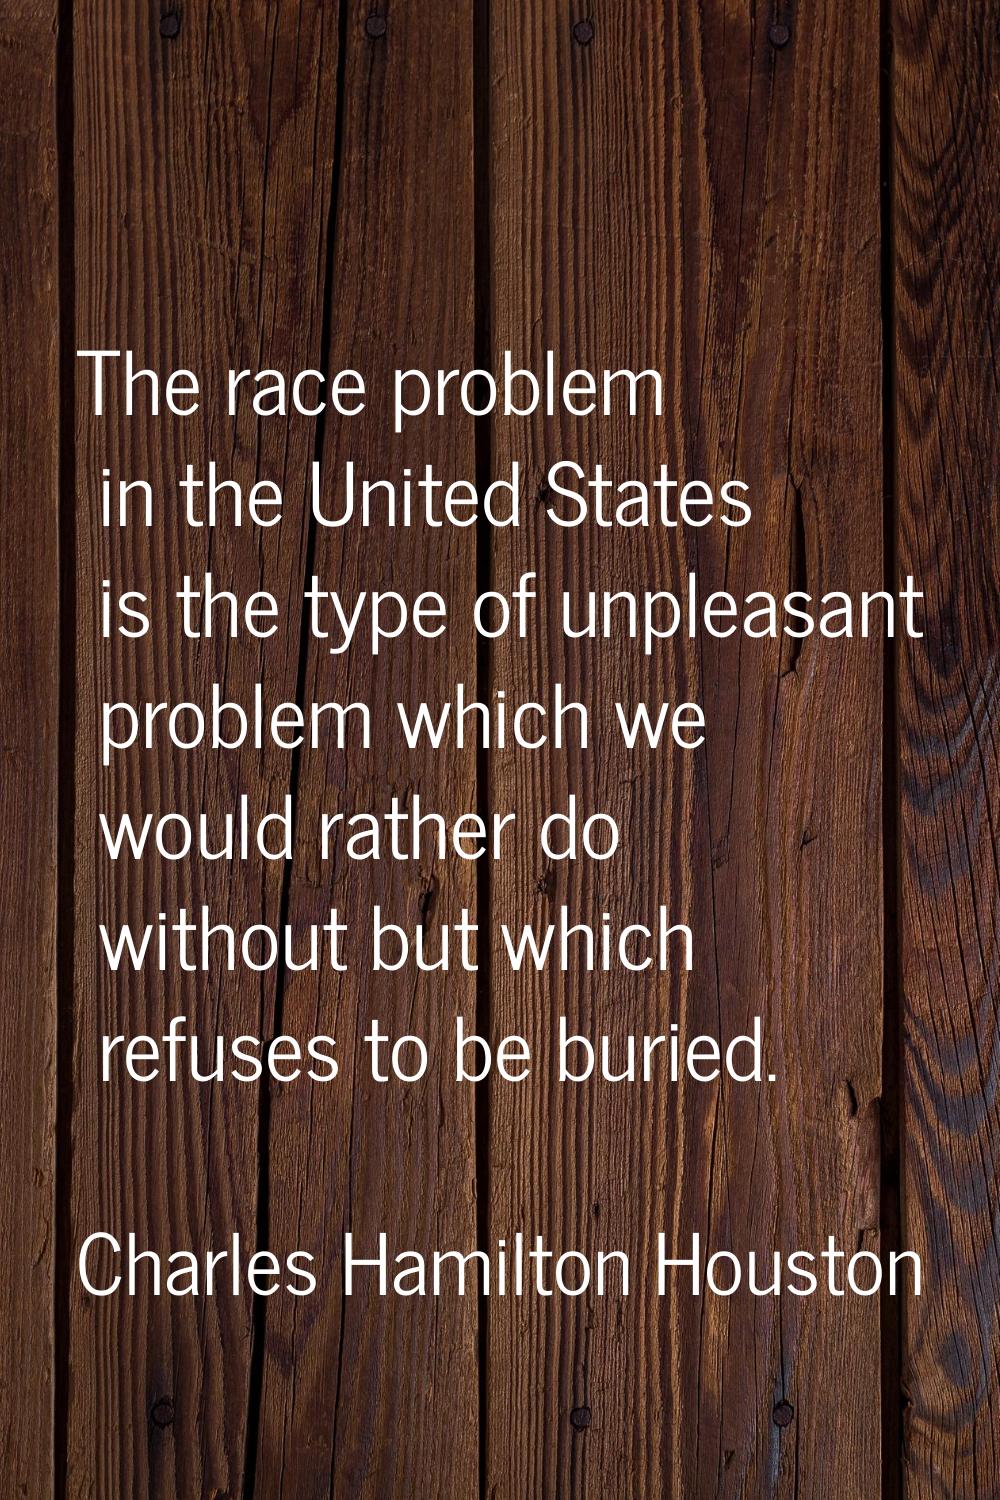 The race problem in the United States is the type of unpleasant problem which we would rather do wi